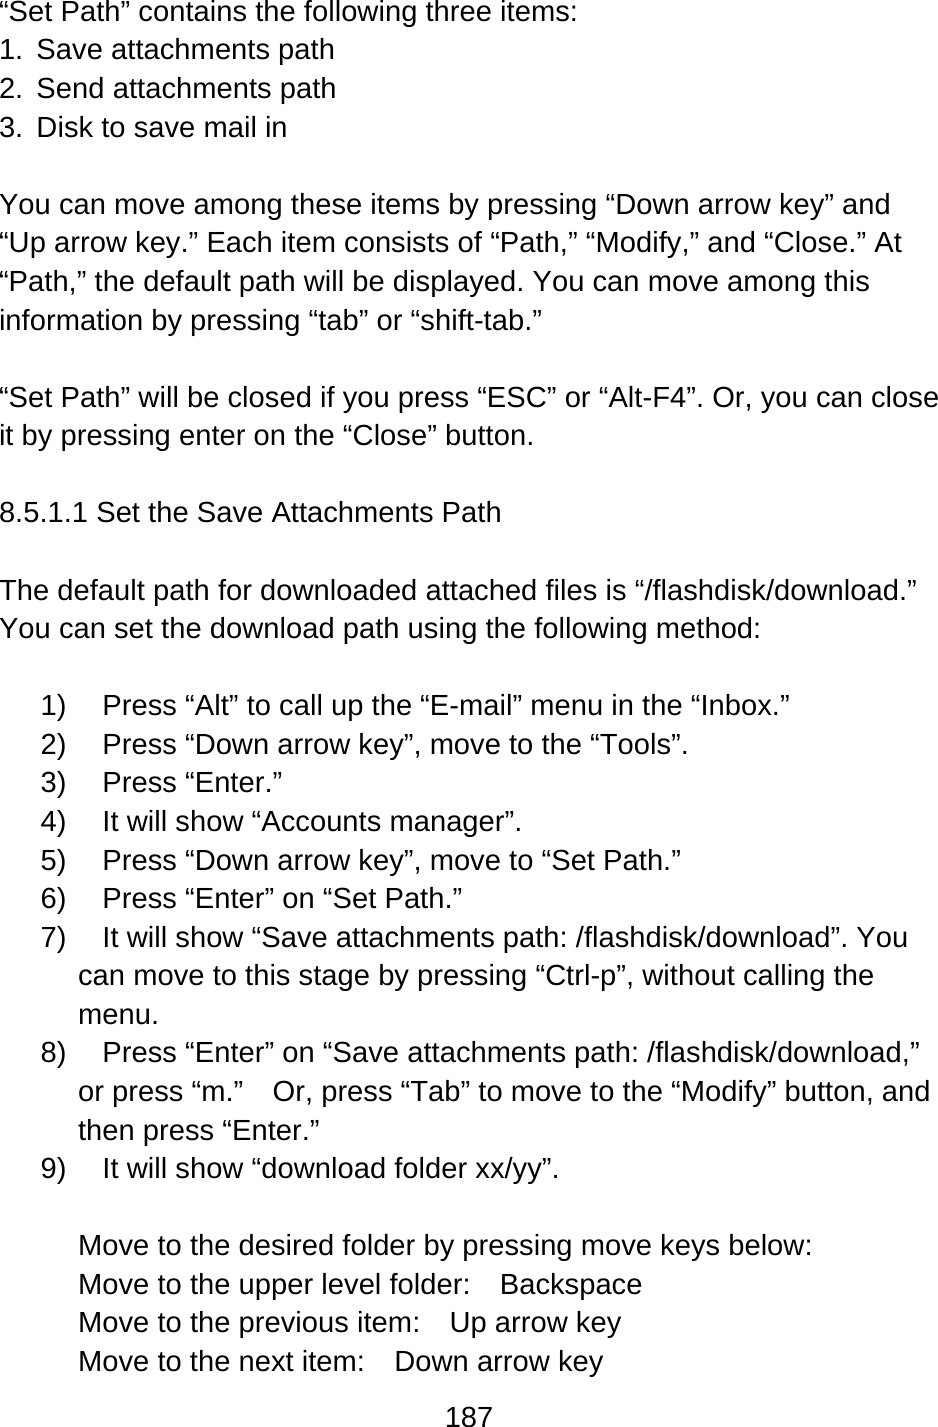 187  “Set Path” contains the following three items: 1. Save attachments path 2. Send attachments path 3.  Disk to save mail in  You can move among these items by pressing “Down arrow key” and “Up arrow key.” Each item consists of “Path,” “Modify,” and “Close.” At “Path,” the default path will be displayed. You can move among this information by pressing “tab” or “shift-tab.”  “Set Path” will be closed if you press “ESC” or “Alt-F4”. Or, you can close it by pressing enter on the “Close” button.  8.5.1.1 Set the Save Attachments Path  The default path for downloaded attached files is “/flashdisk/download.”   You can set the download path using the following method:  1)  Press “Alt” to call up the “E-mail” menu in the “Inbox.” 2)  Press “Down arrow key”, move to the “Tools”. 3) Press “Enter.”  4)  It will show “Accounts manager”. 5)  Press “Down arrow key”, move to “Set Path.” 6)  Press “Enter” on “Set Path.”     7)  It will show “Save attachments path: /flashdisk/download”. You can move to this stage by pressing “Ctrl-p”, without calling the menu. 8)  Press “Enter” on “Save attachments path: /flashdisk/download,” or press “m.”    Or, press “Tab” to move to the “Modify” button, and then press “Enter.” 9)  It will show “download folder xx/yy”.  Move to the desired folder by pressing move keys below: Move to the upper level folder:  Backspace Move to the previous item:    Up arrow key Move to the next item:    Down arrow key 